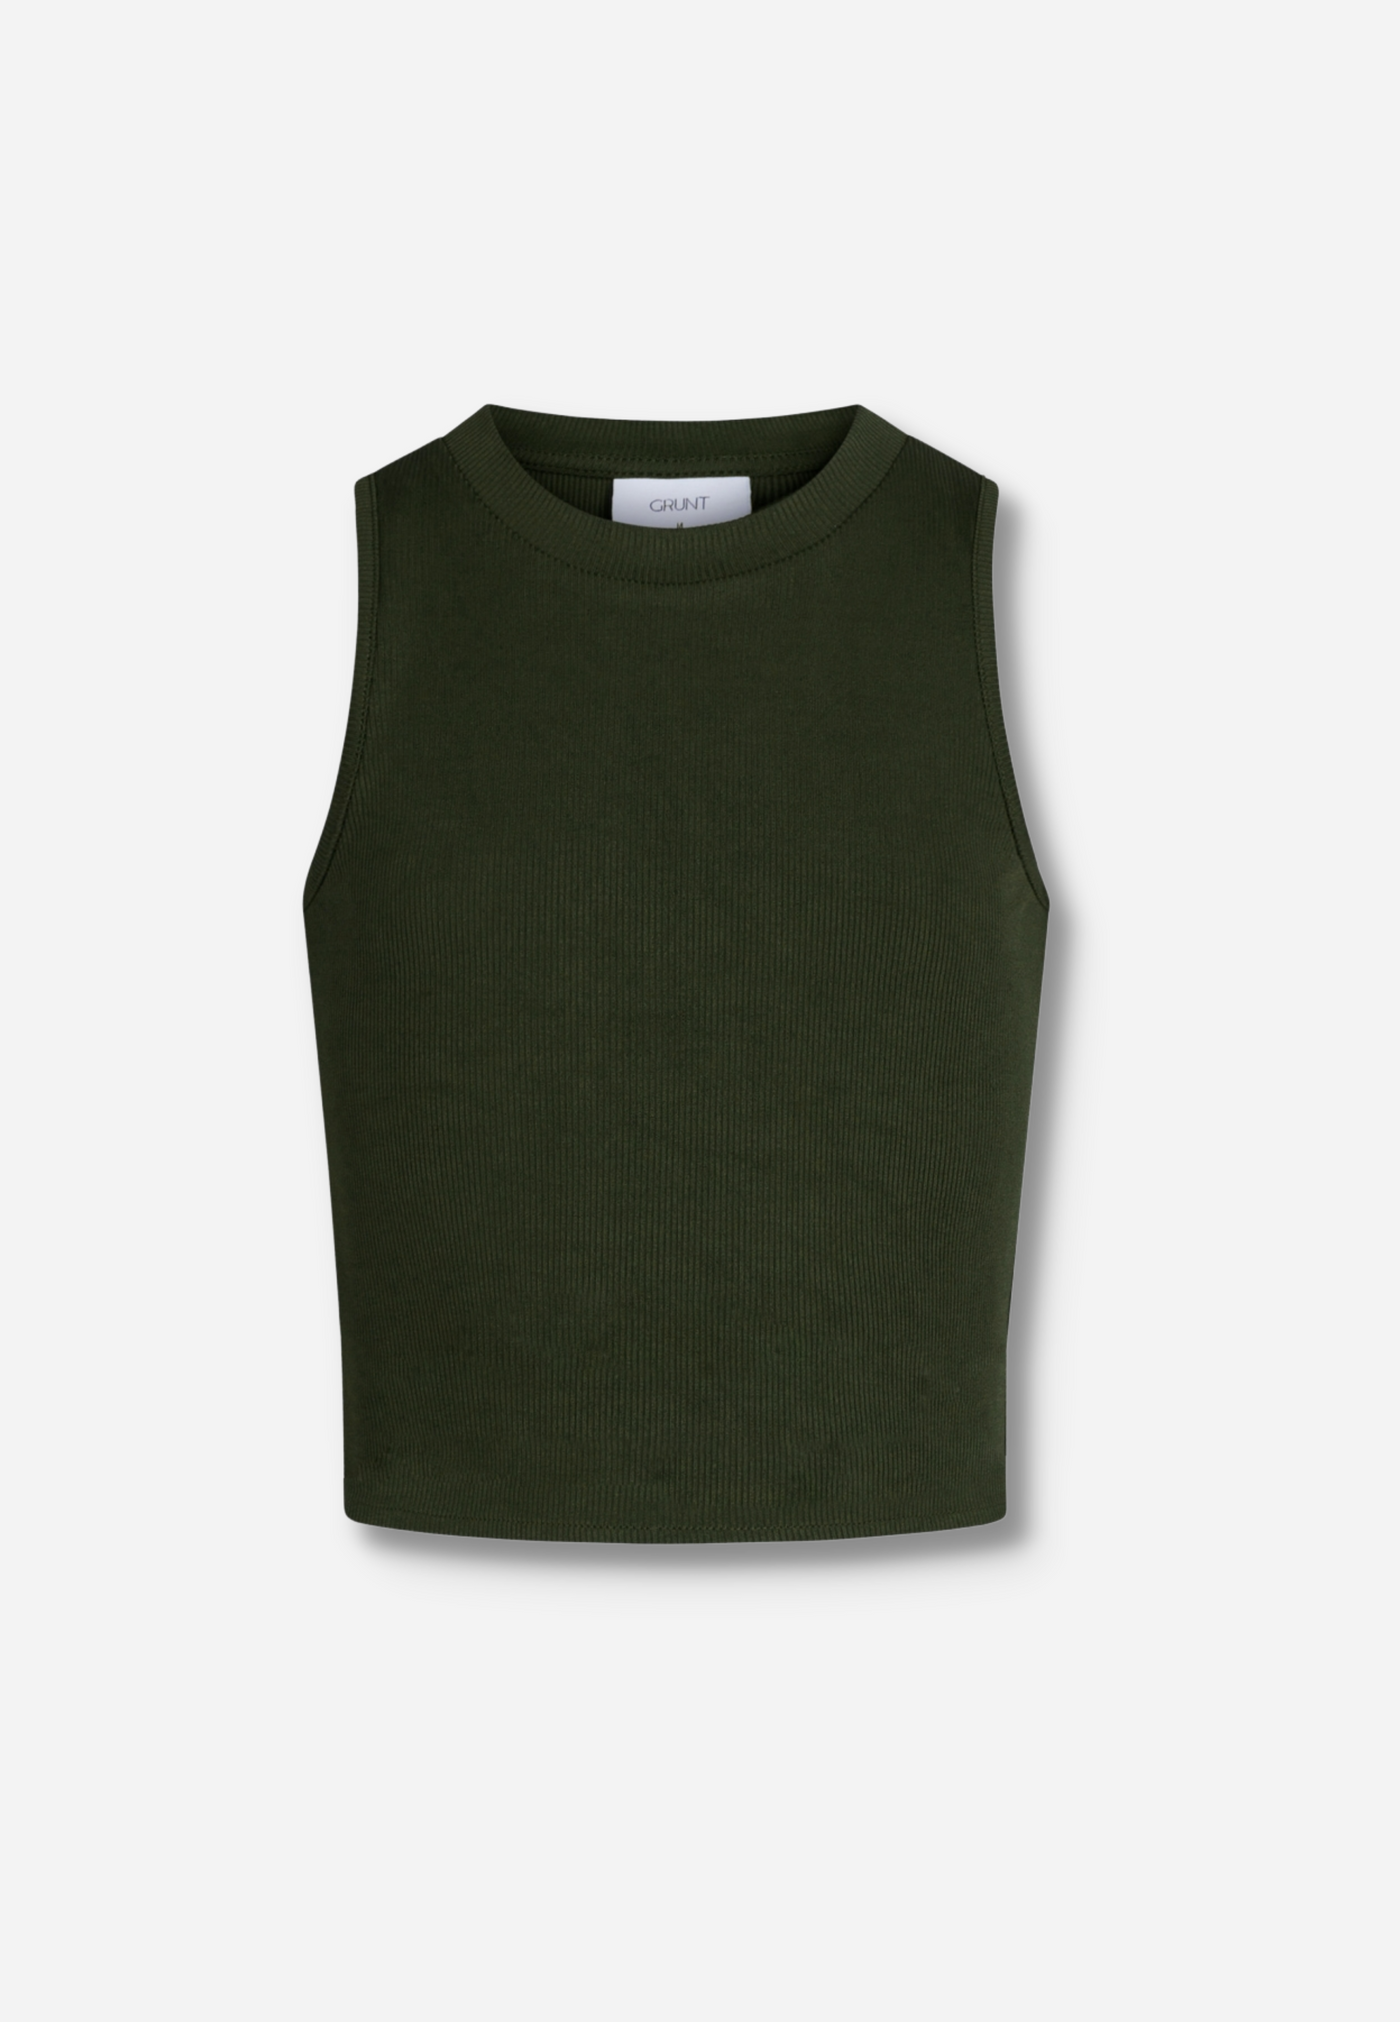 PRIOR TOP - ARMY GREEN